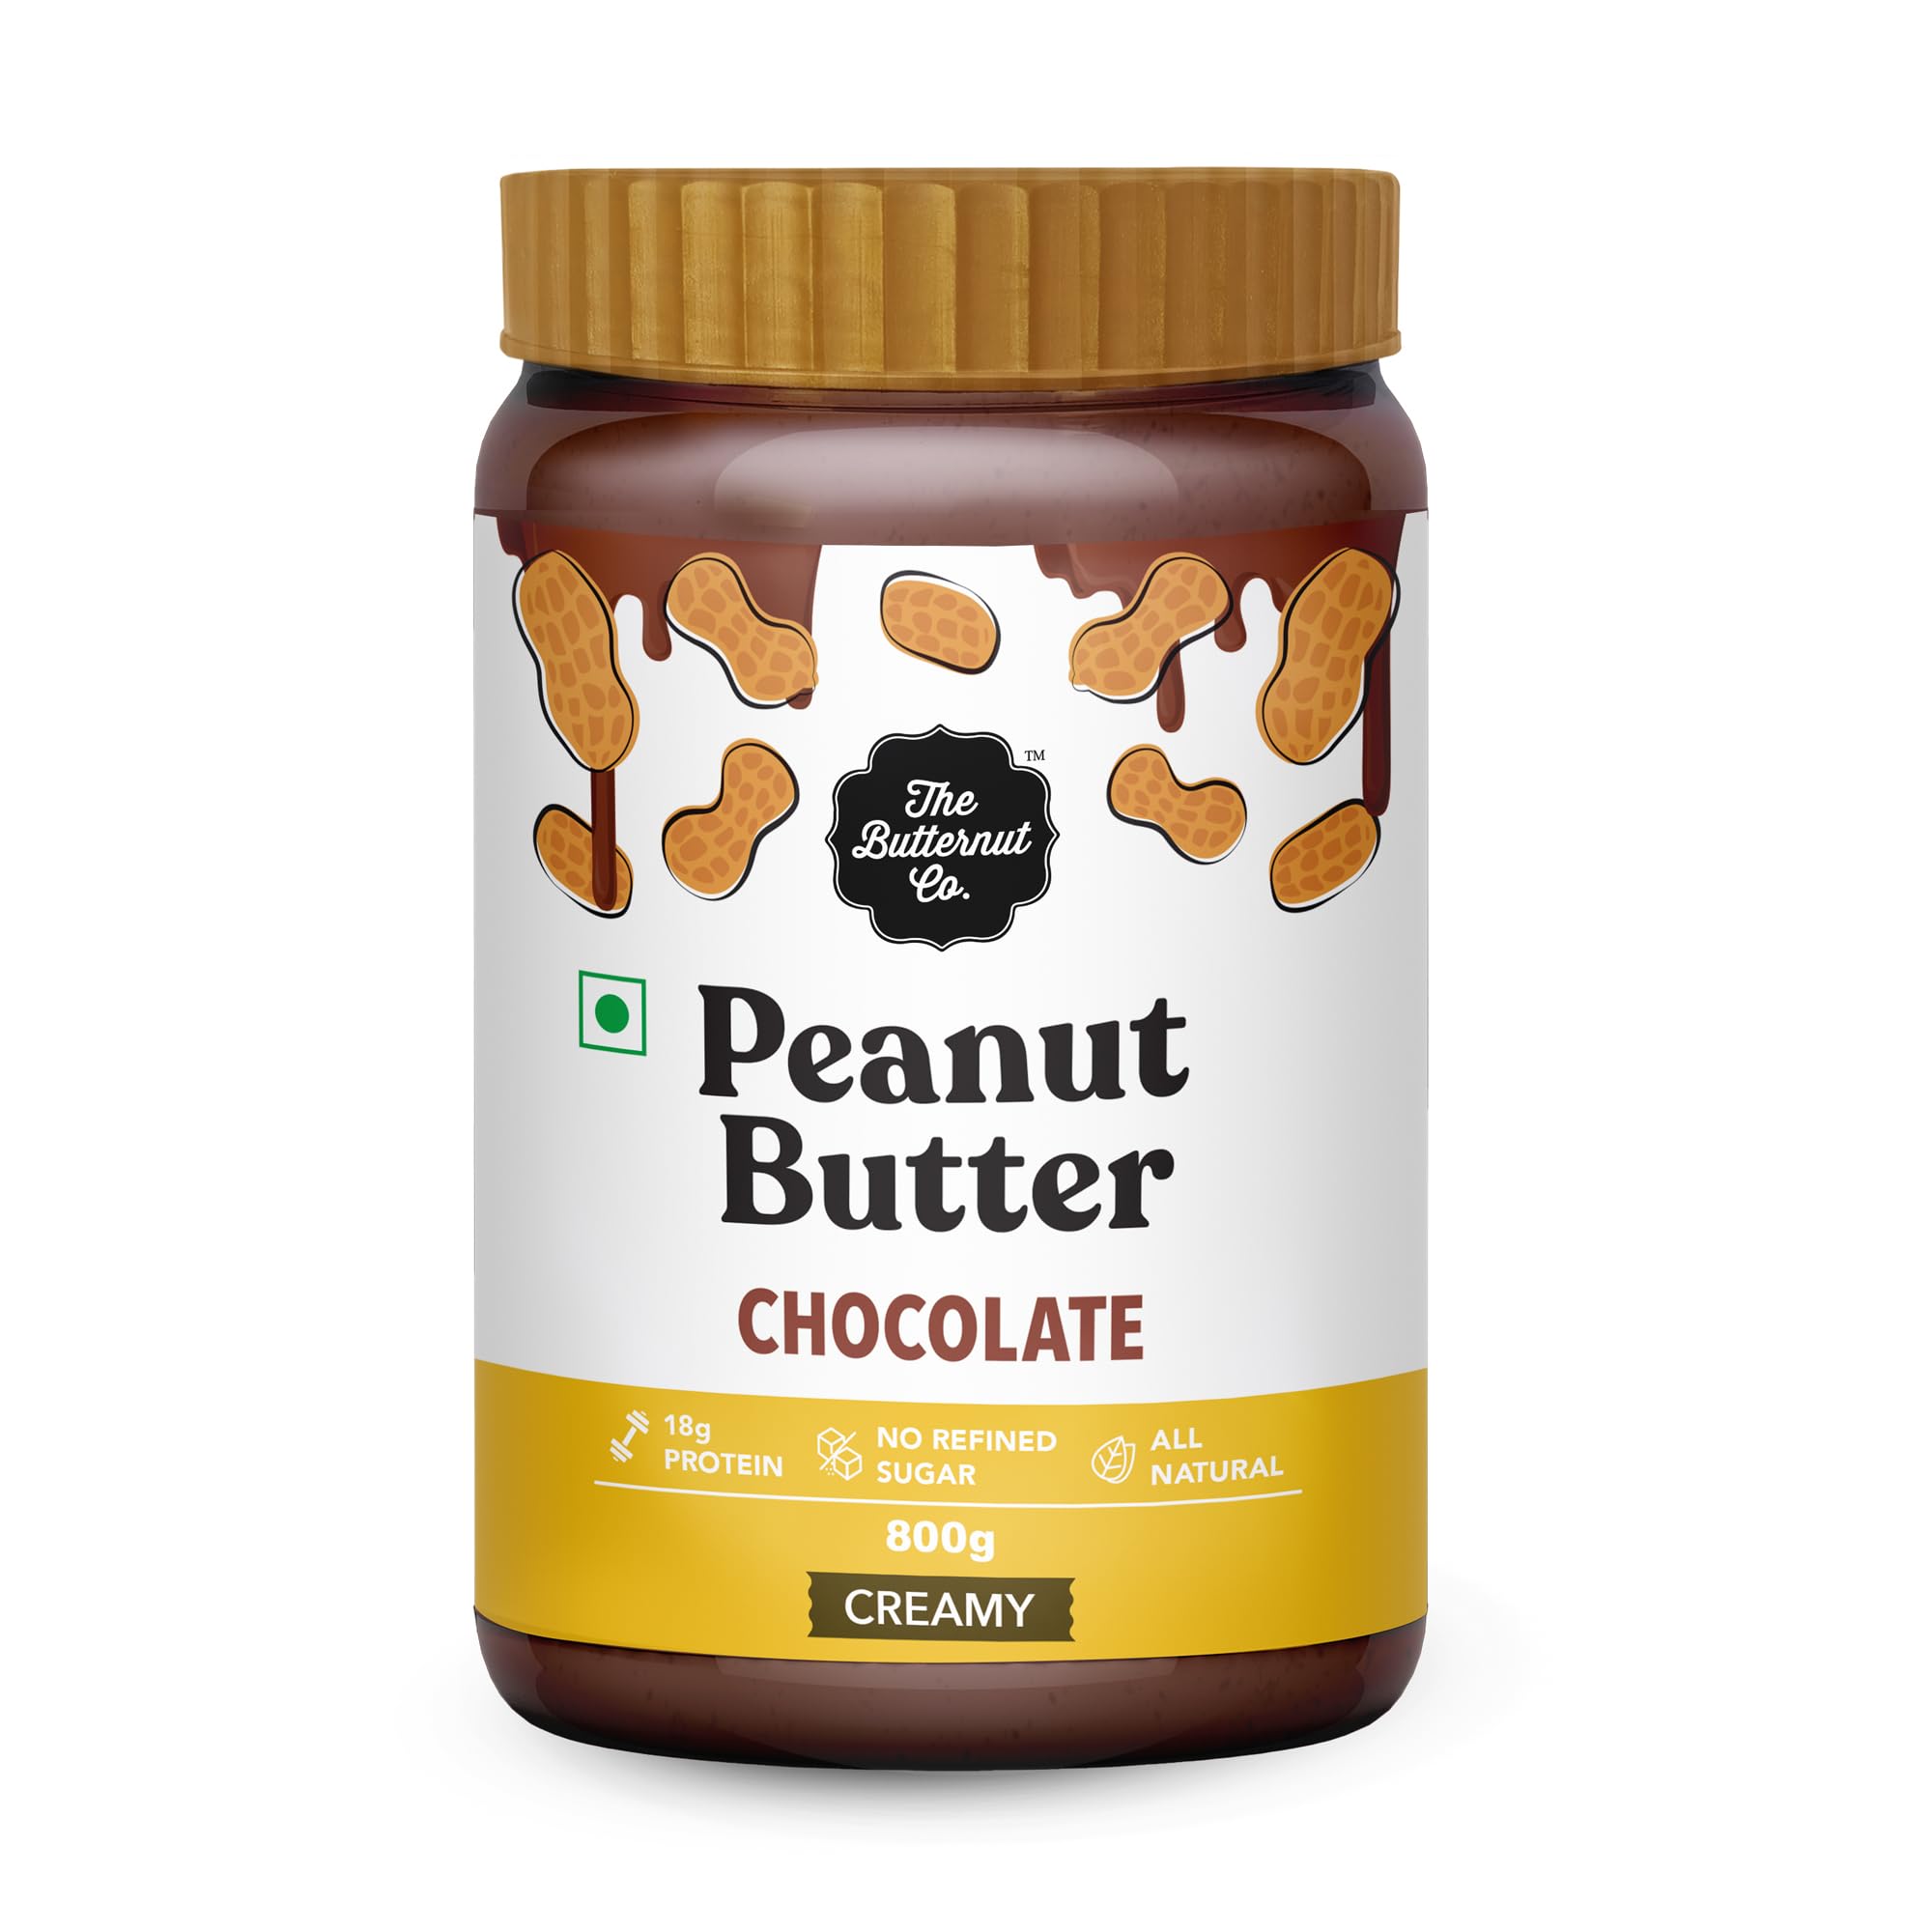 The Butternut Co. Chocolate Peanut Butter,Creamy | 18 g Protein | No Refined Sugar | High Protein, Nutritious and Delicious Treat for Breakfast | All Natural| No Cholesterol - 800 g (Pack of 1)